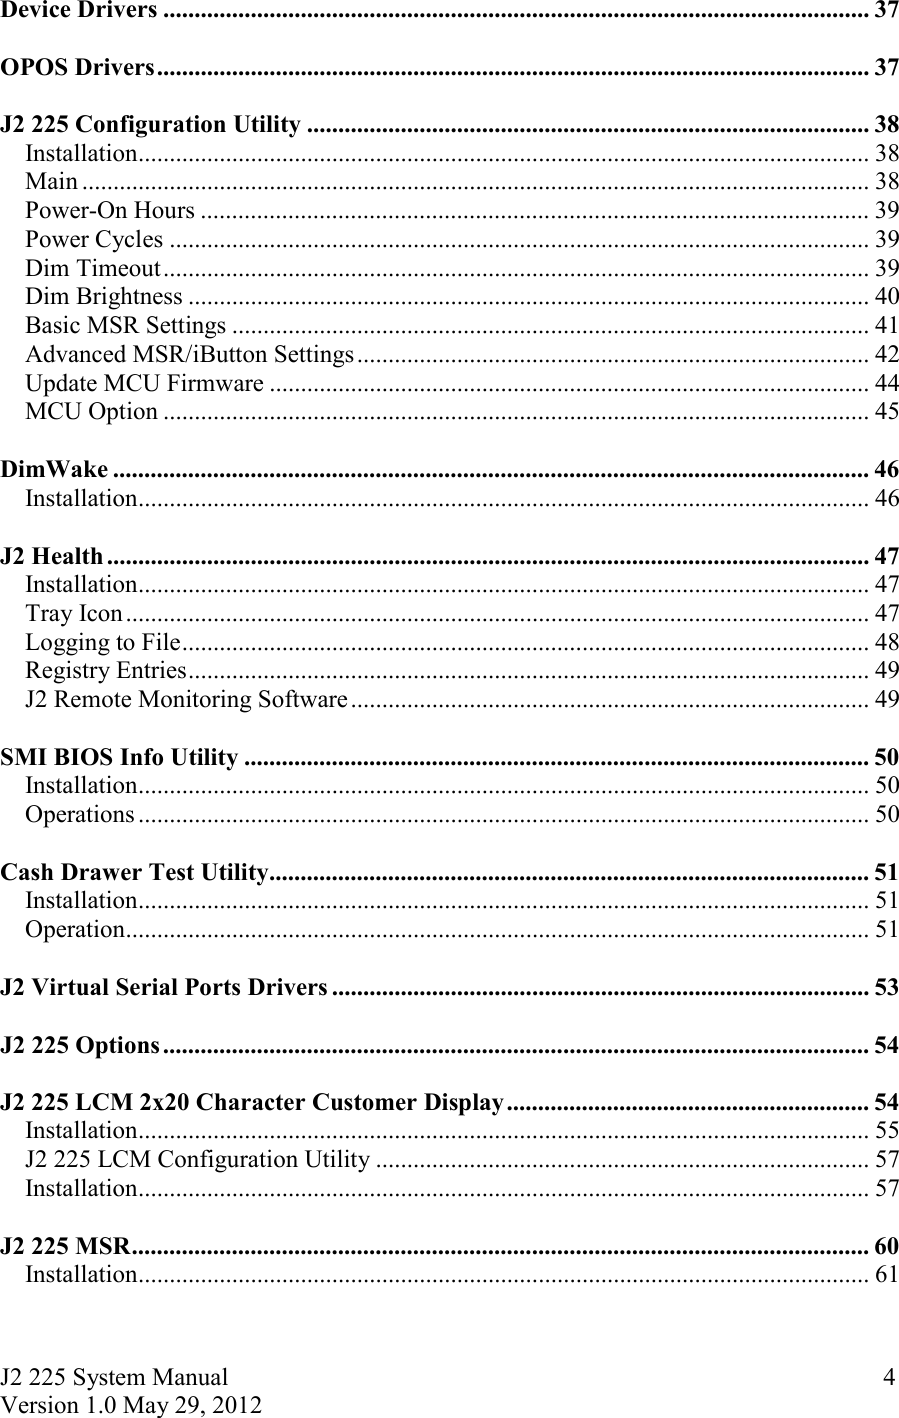 J2 225 System Manual Version 1.0 May 29, 2012      4Device Drivers ................................................................................................................. 37  OPOS Drivers .................................................................................................................. 37  J2 225 Configuration Utility .......................................................................................... 38Installation ..................................................................................................................... 38Main .............................................................................................................................. 38Power-On Hours ........................................................................................................... 39Power Cycles ................................................................................................................ 39Dim Timeout ................................................................................................................. 39Dim Brightness ............................................................................................................. 40Basic MSR Settings ...................................................................................................... 41Advanced MSR/iButton Settings .................................................................................. 42Update MCU Firmware ................................................................................................ 44MCU Option ................................................................................................................. 45  DimWake ......................................................................................................................... 46Installation ..................................................................................................................... 46  J2 Health .......................................................................................................................... 47Installation ..................................................................................................................... 47Tray Icon ....................................................................................................................... 47Logging to File .............................................................................................................. 48Registry Entries ............................................................................................................. 49J2 Remote Monitoring Software ................................................................................... 49  SMI BIOS Info Utility .................................................................................................... 50Installation ..................................................................................................................... 50Operations ..................................................................................................................... 50  Cash Drawer Test Utility ................................................................................................ 51Installation ..................................................................................................................... 51Operation ....................................................................................................................... 51  J2 Virtual Serial Ports Drivers ...................................................................................... 53  J2 225 Options ................................................................................................................. 54  J2 225 LCM 2x20 Character Customer Display .......................................................... 54Installation ..................................................................................................................... 55J2 225 LCM Configuration Utility ............................................................................... 57Installation ..................................................................................................................... 57  J2 225 MSR ...................................................................................................................... 60Installation ..................................................................................................................... 61  